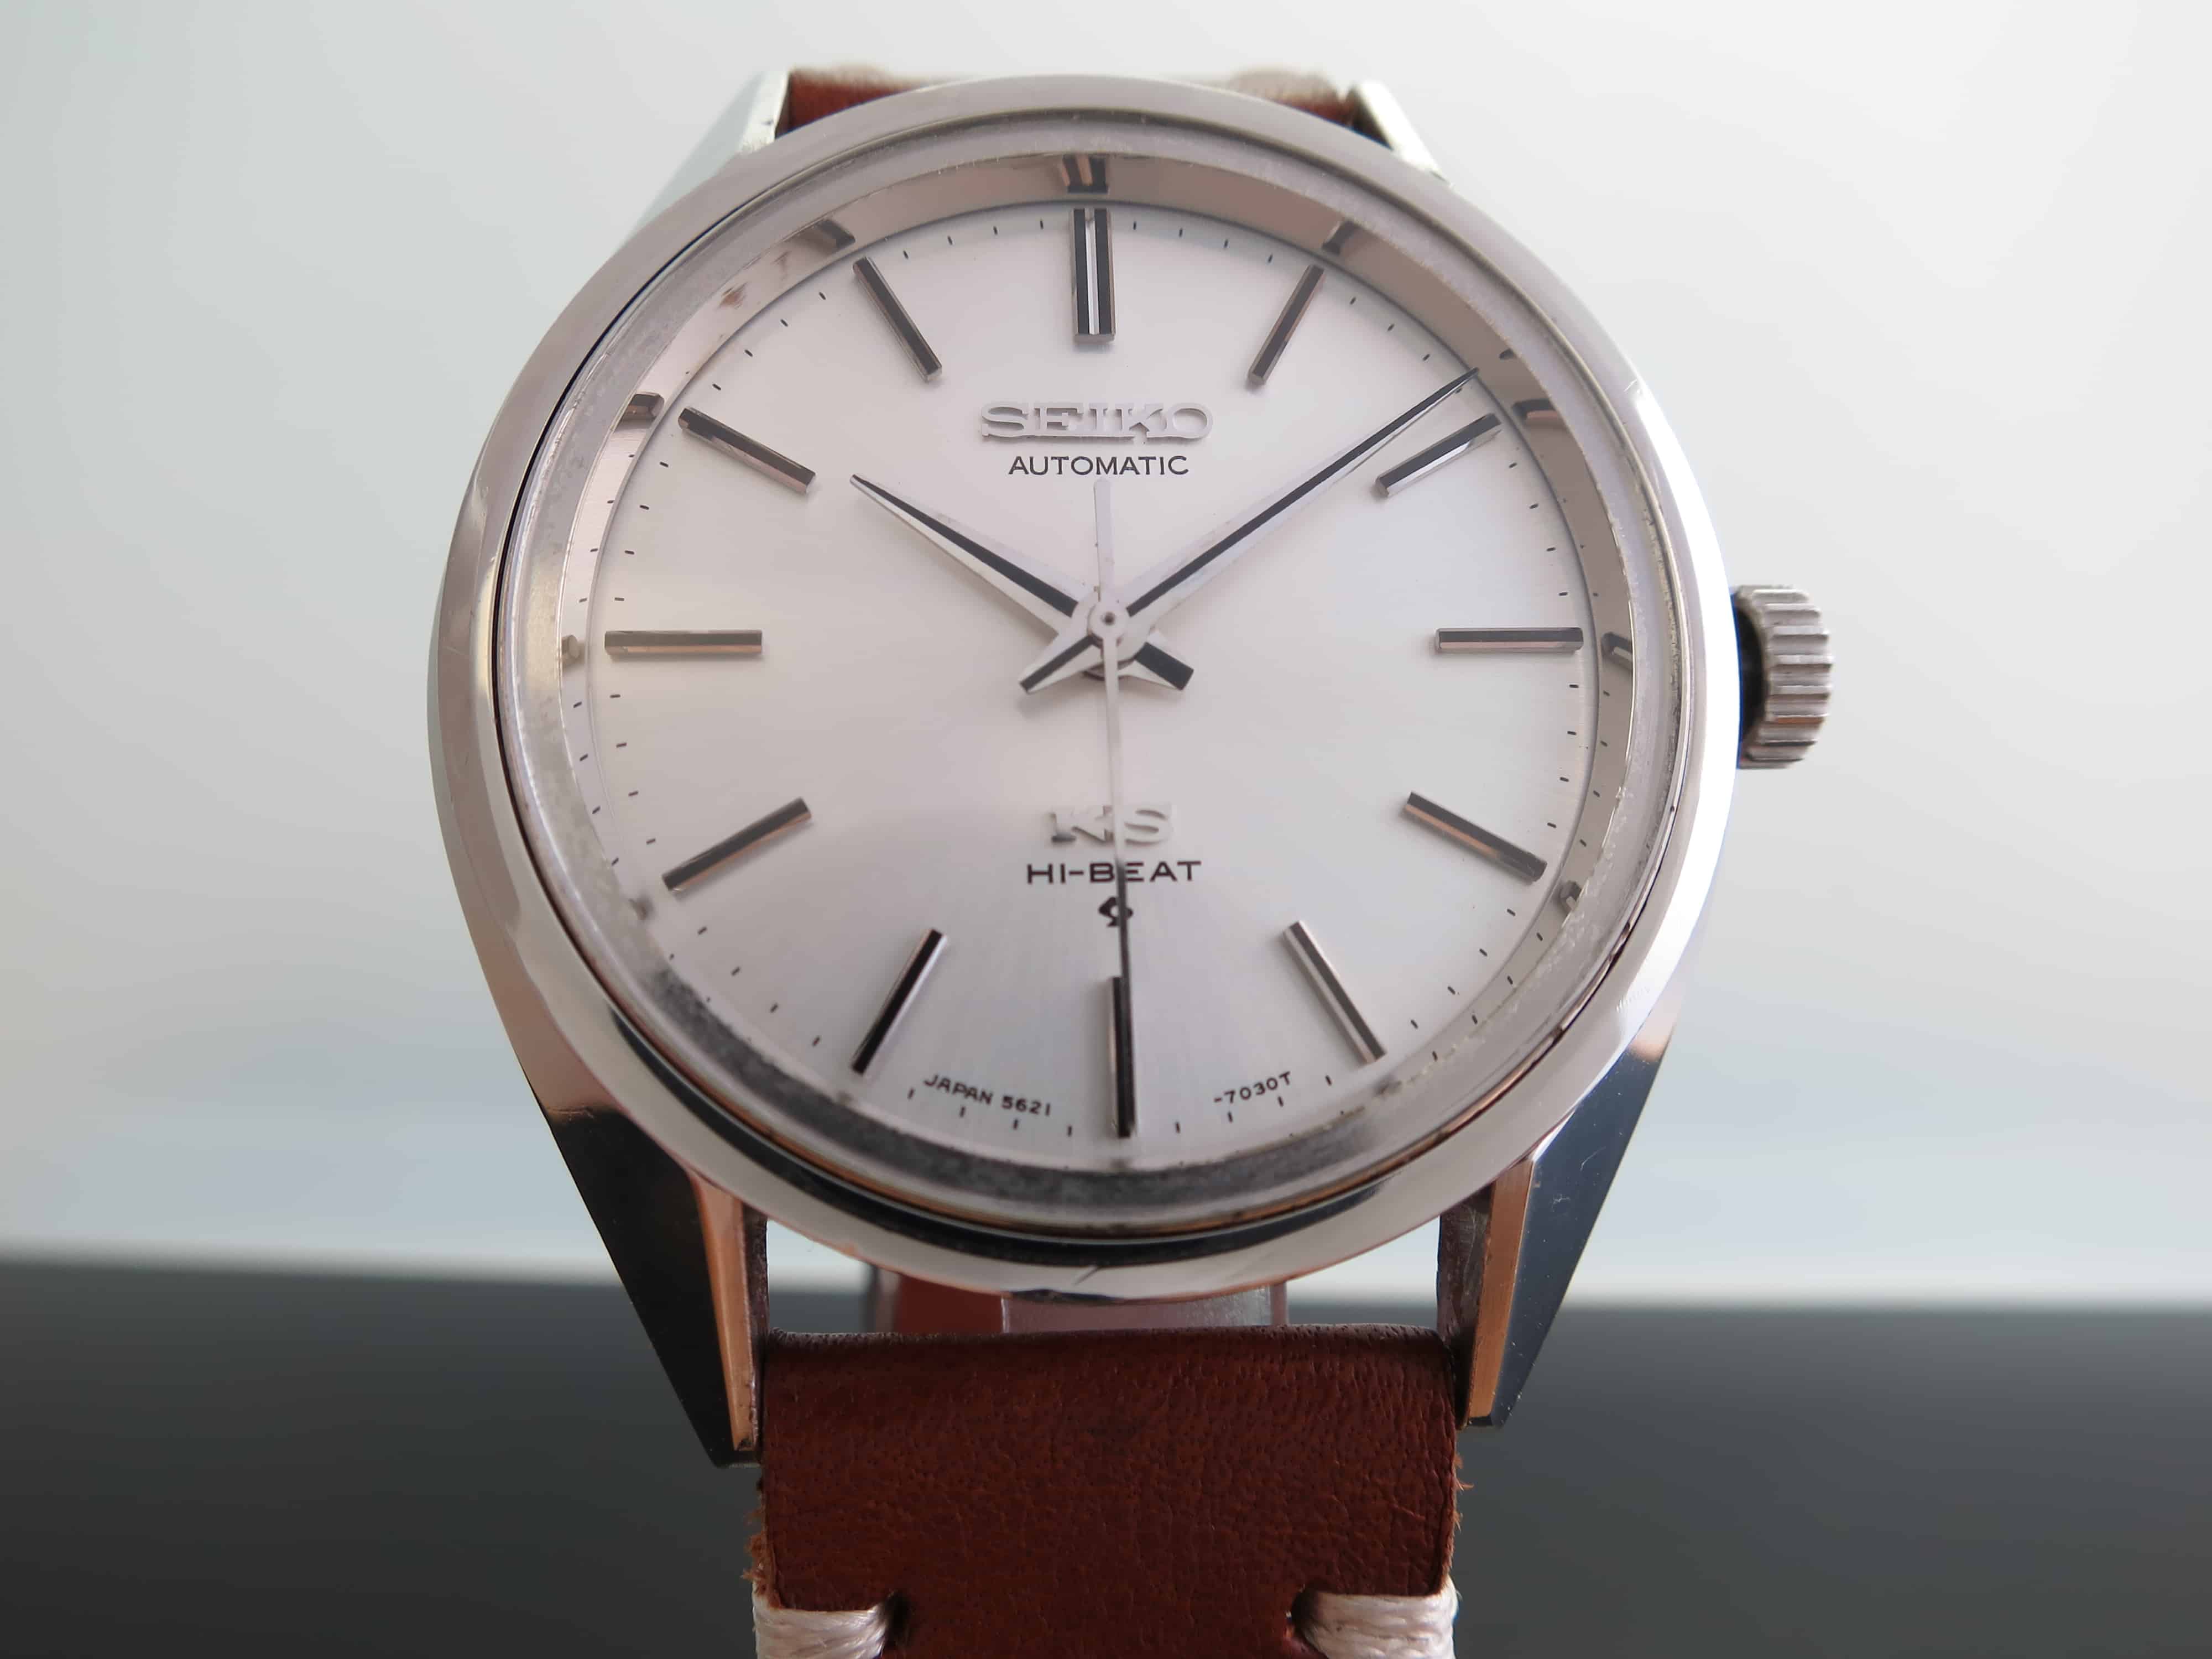 Affordable Vintage: King Seiko ref. 5621-7020, and Some Things to 